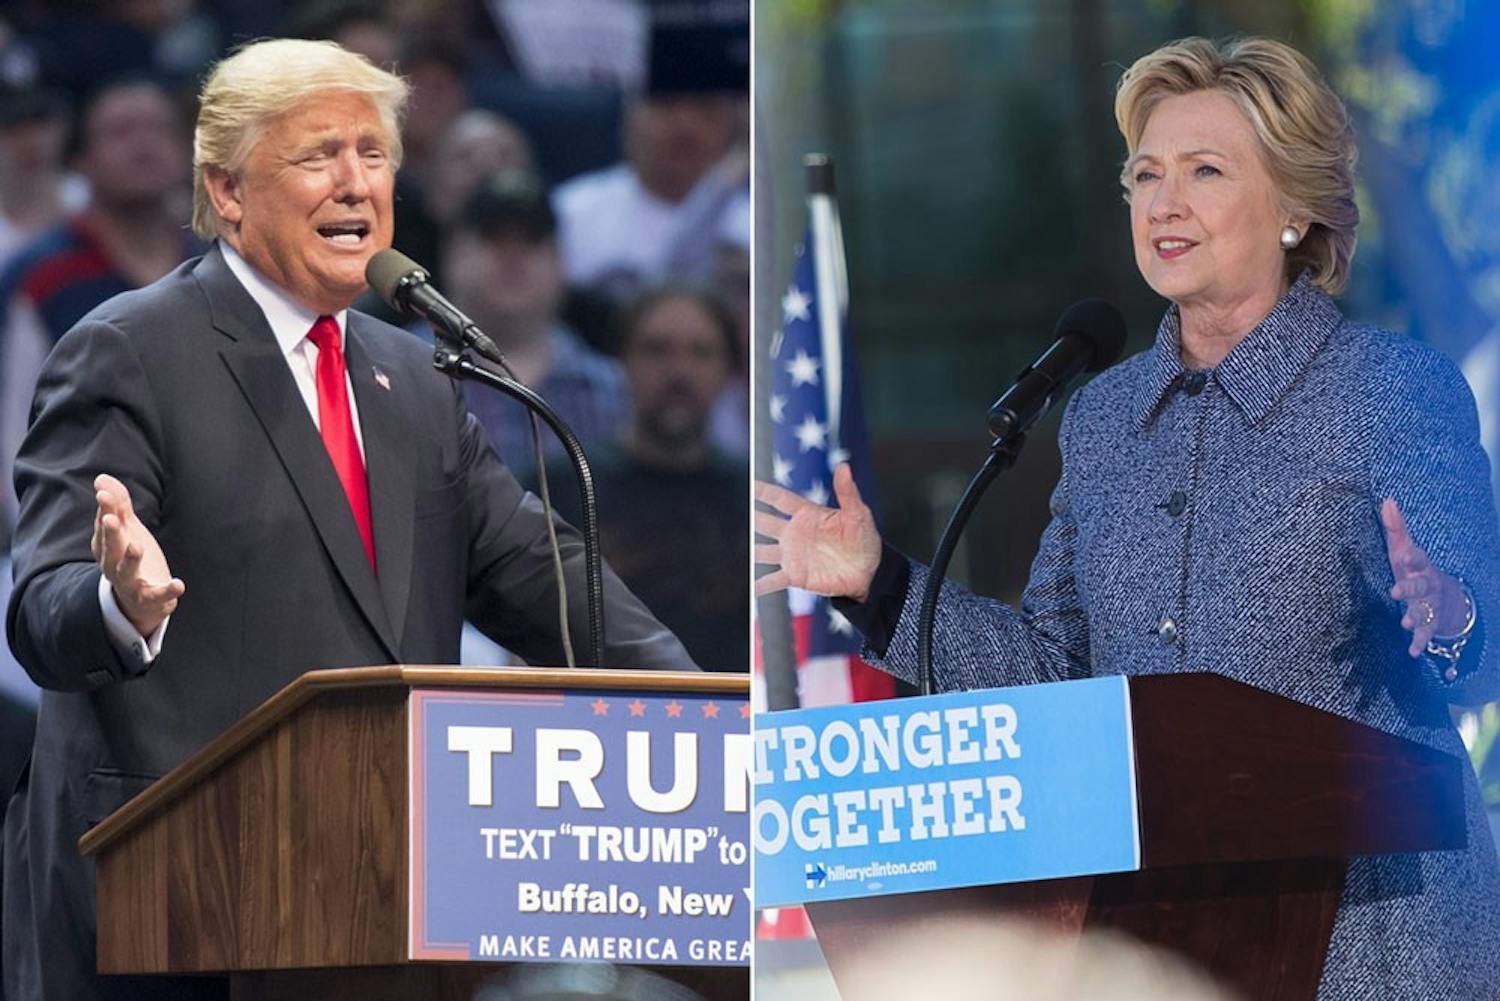 Presidential candidates Donald Trump and Hillary Clinton speak at their rallies. UB professors discuss what voters should be paying attention to for the upcoming election.&nbsp;